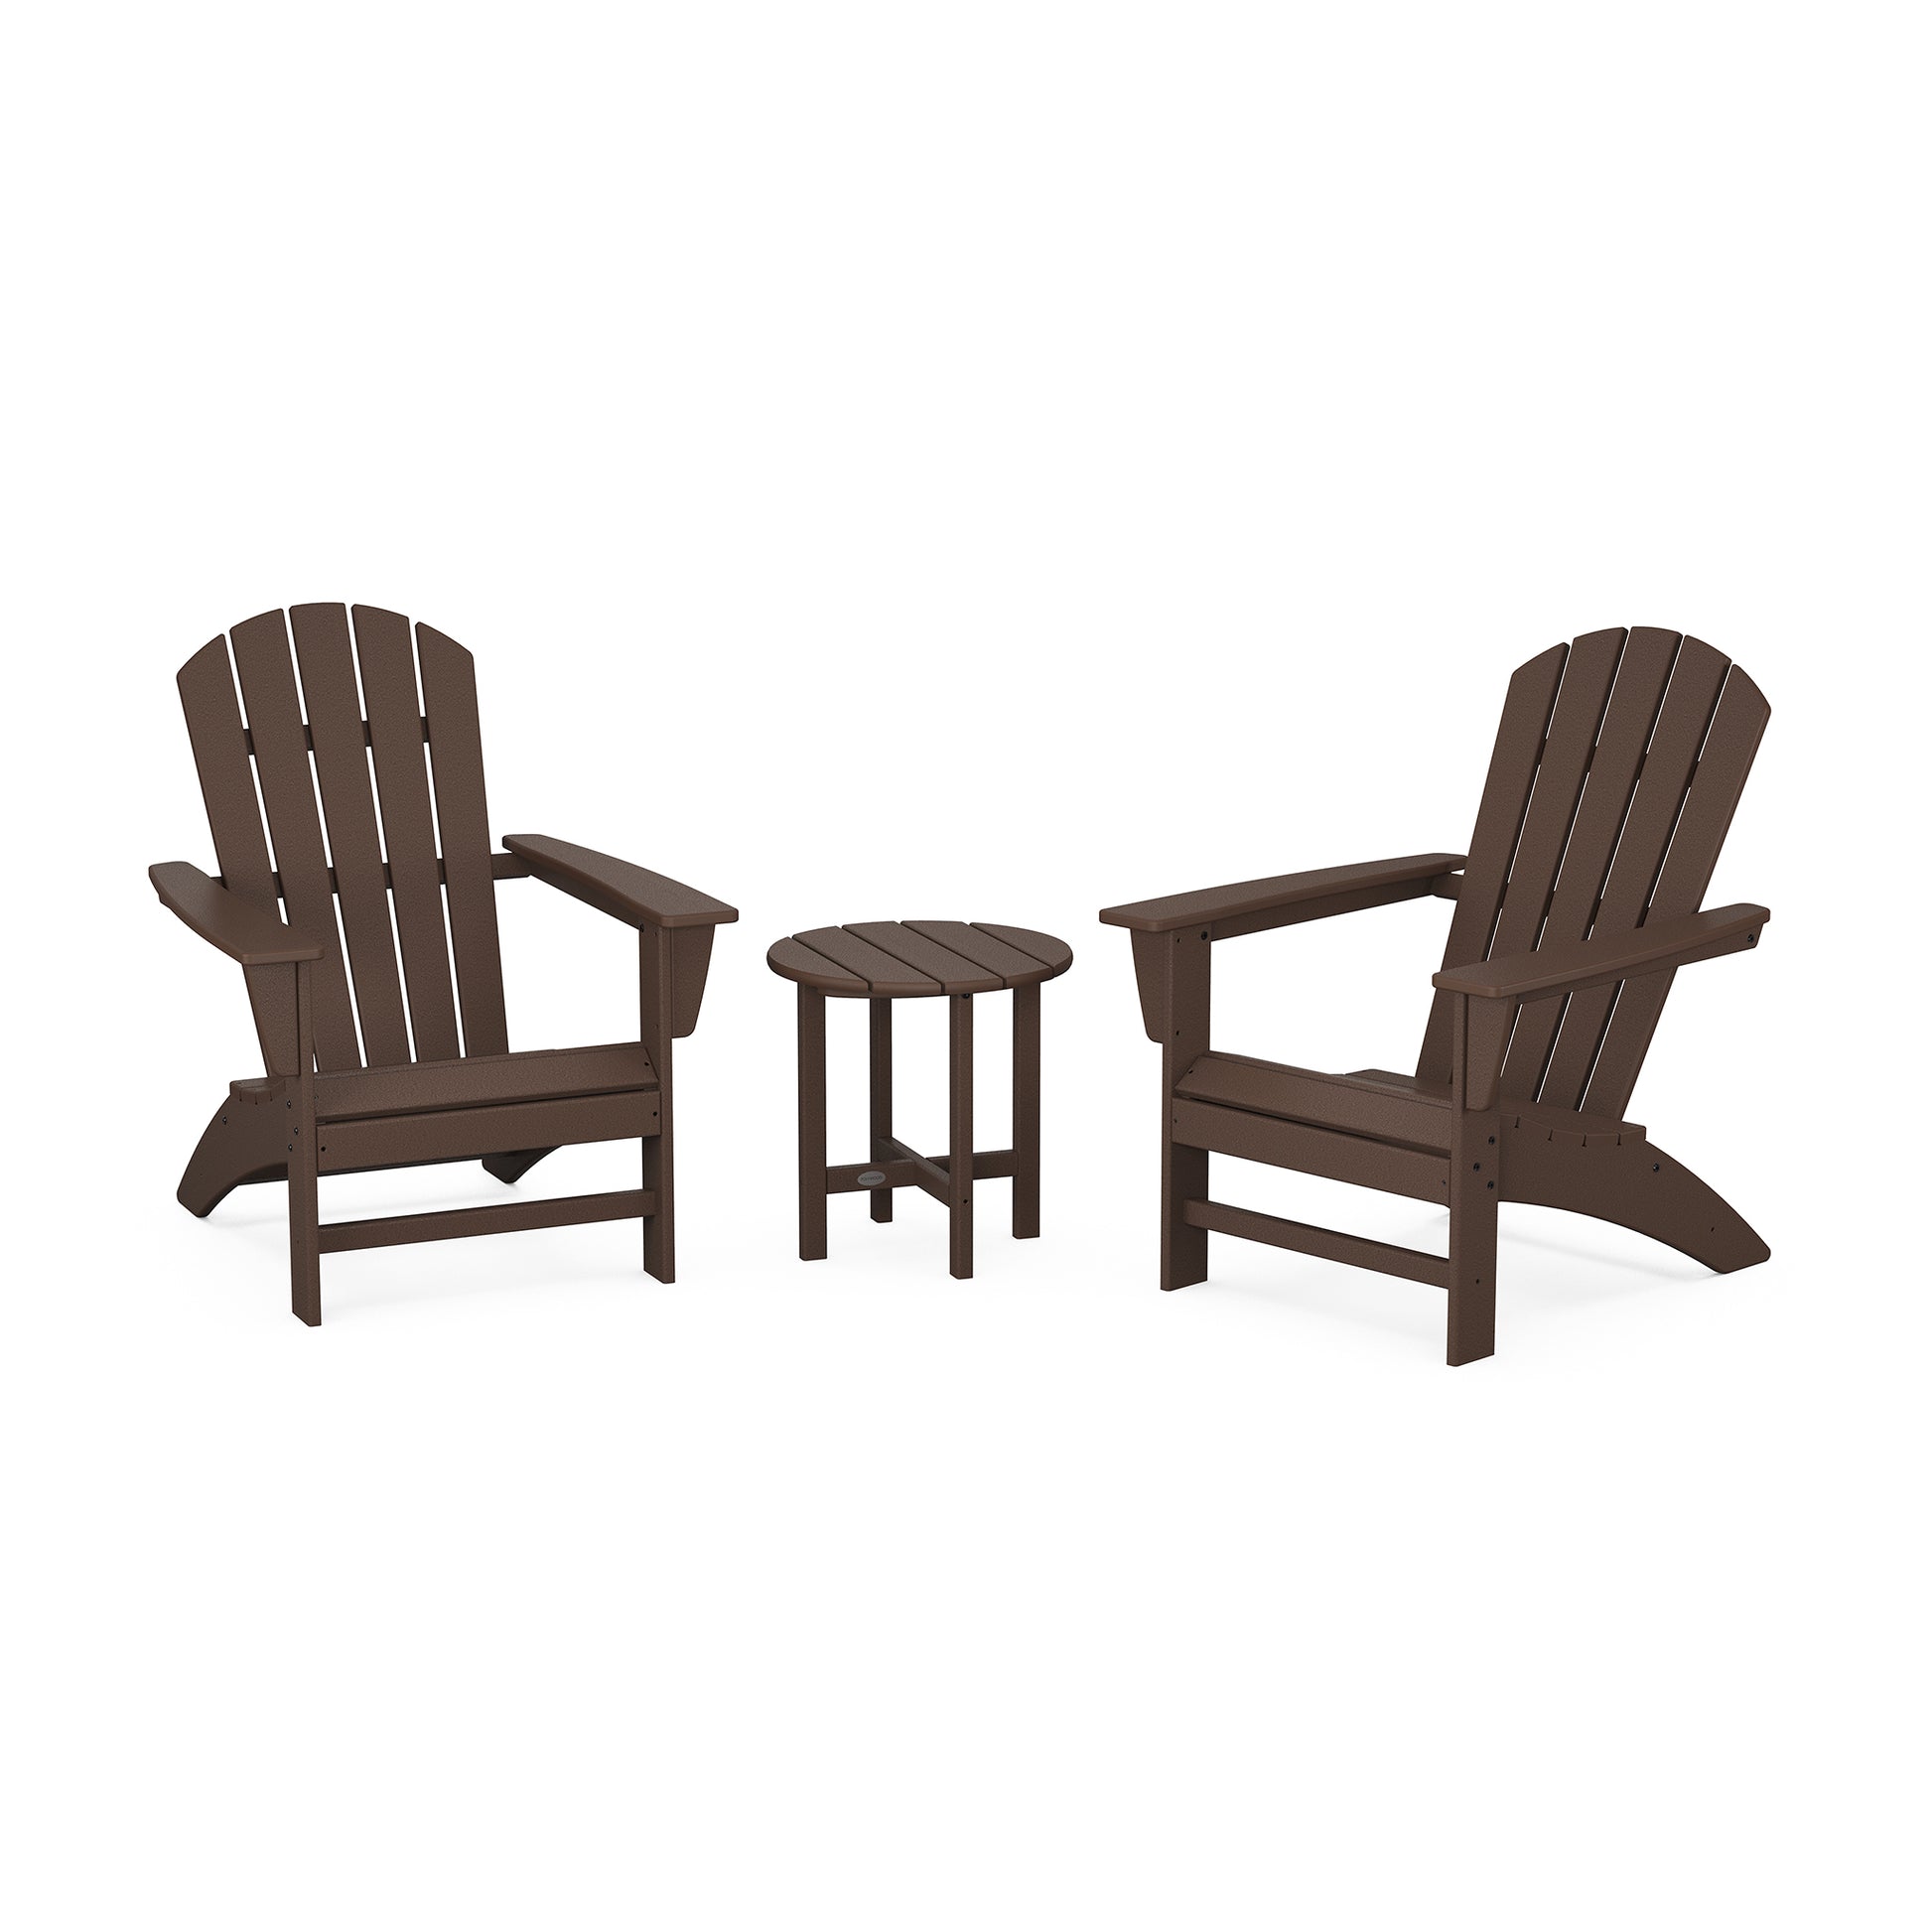 Two brown POLYWOOD Nautical 3-Piece Adirondack Sets facing each other with a small round table between them, set against a plain white background.